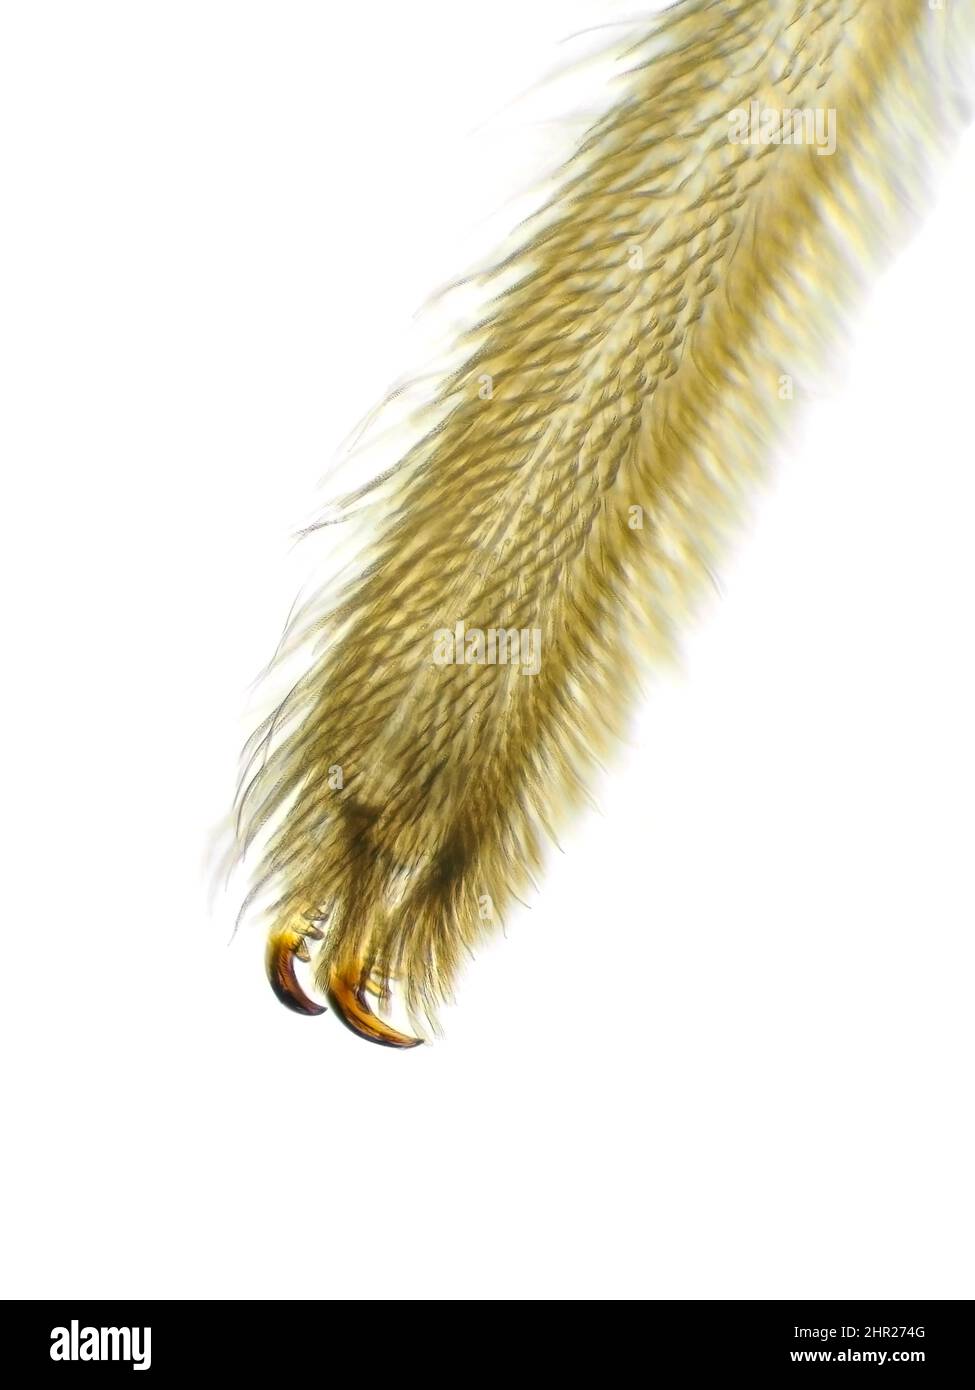 Spider leg under the microscope (tarsus and claws) Stock Photo